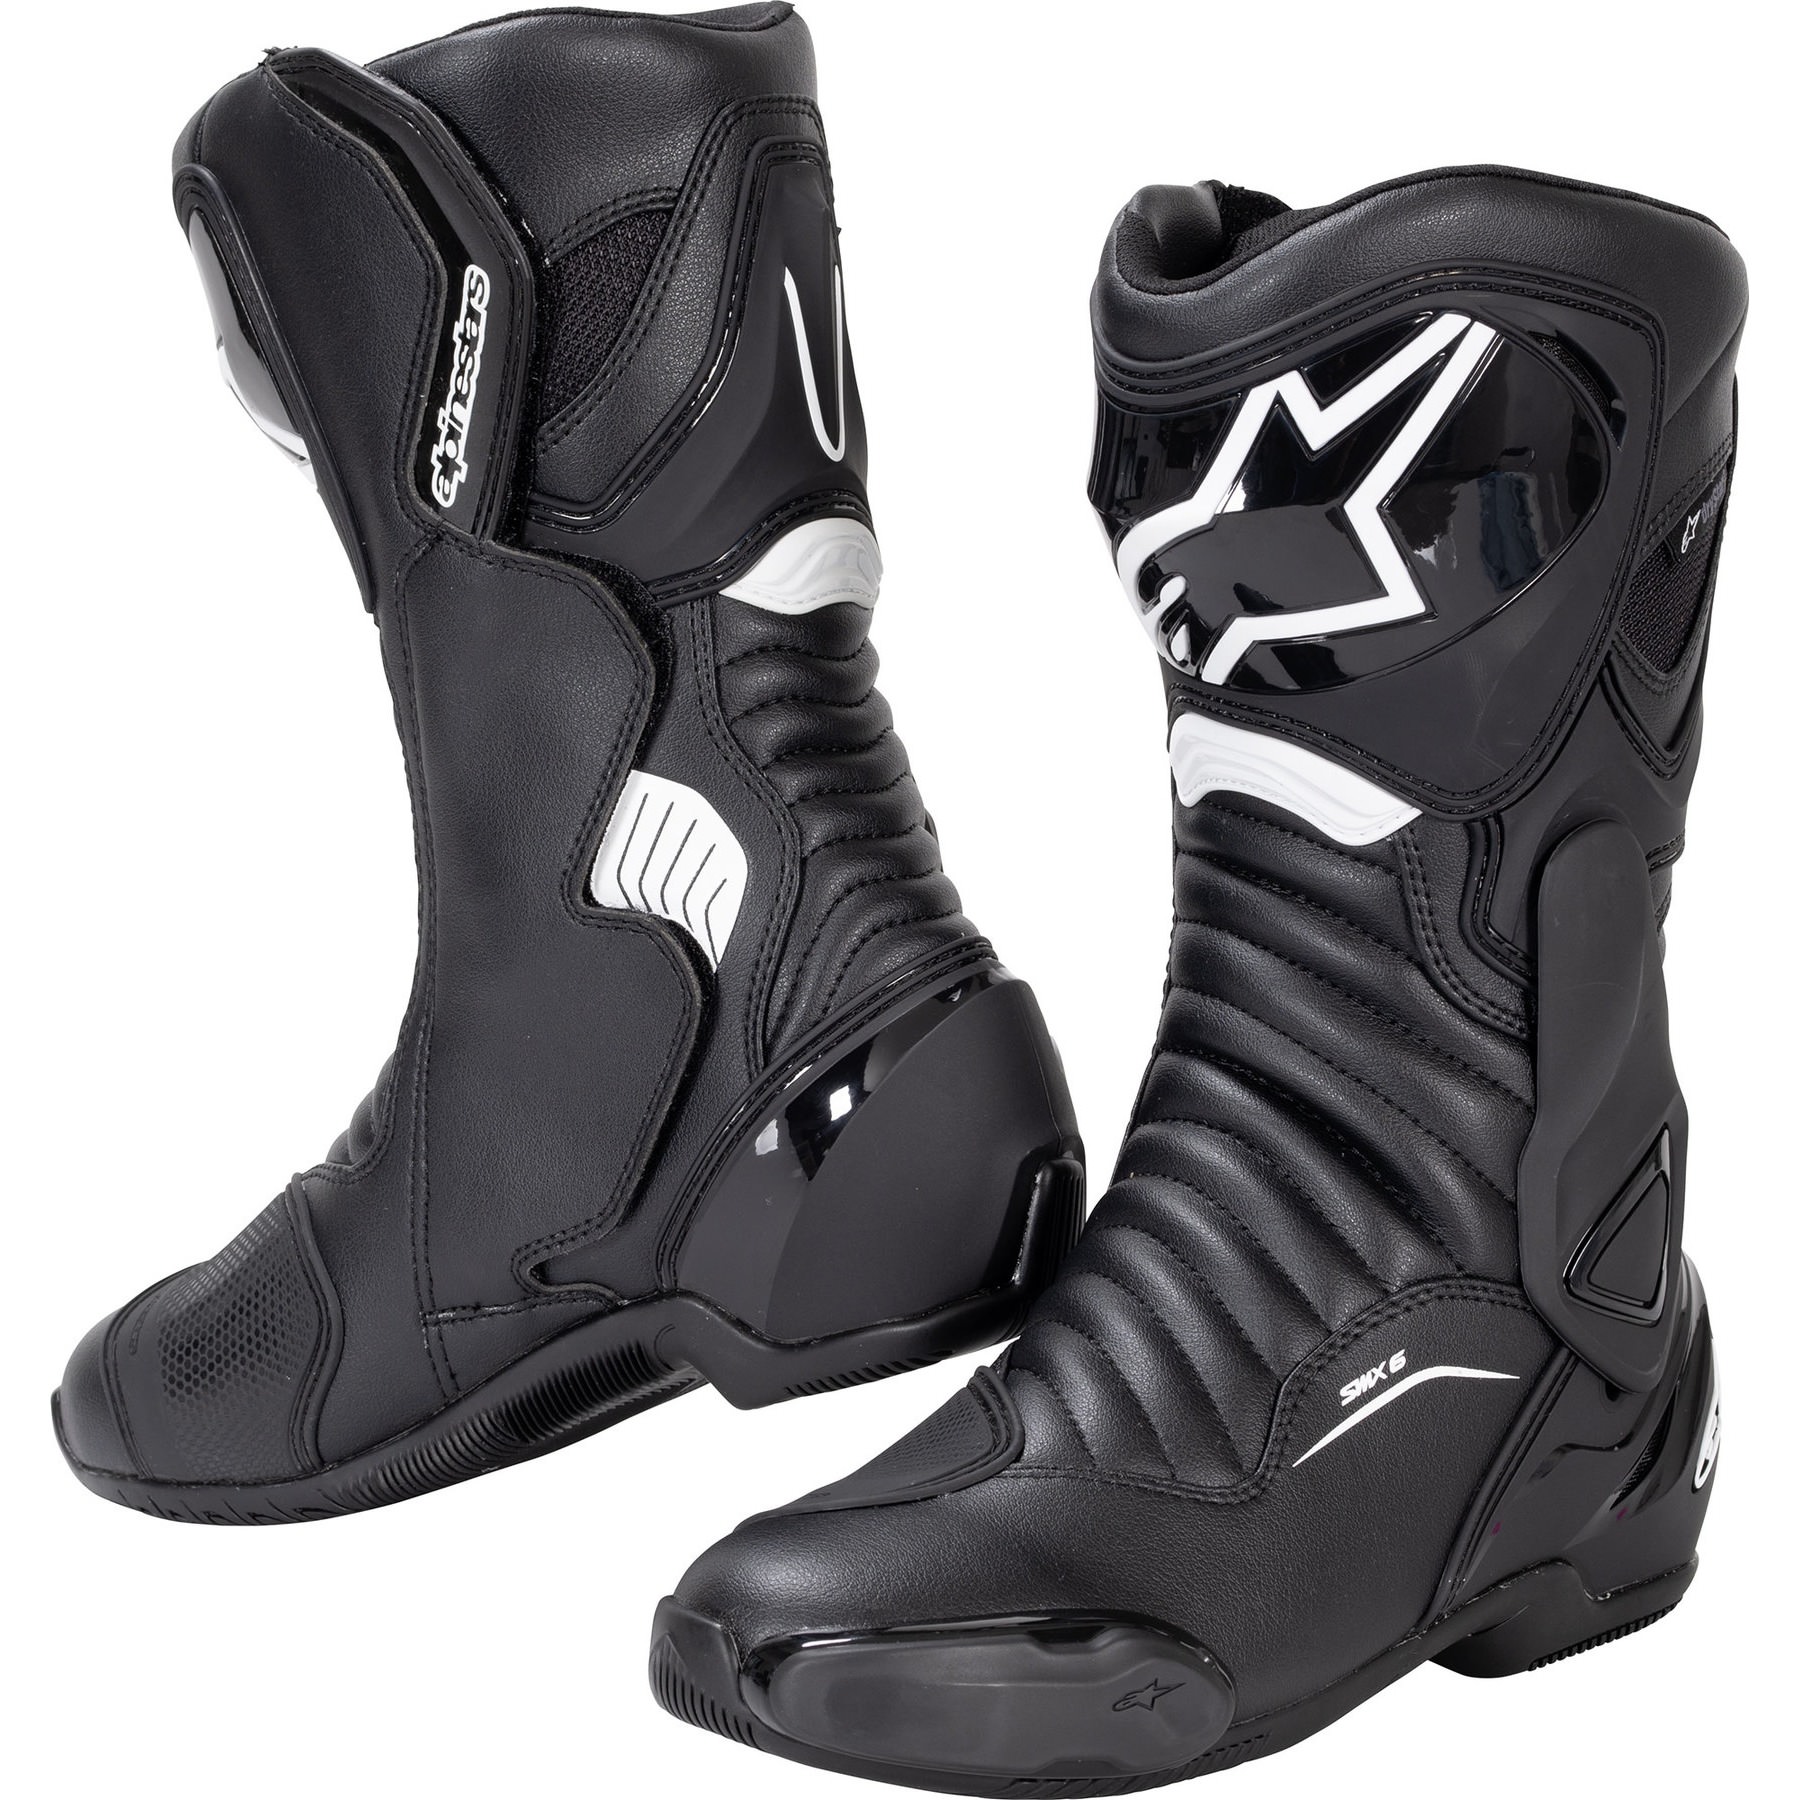 Buy Alpinestars SMX-6 V2 WP boots | Louis motorcycle clothing and ...